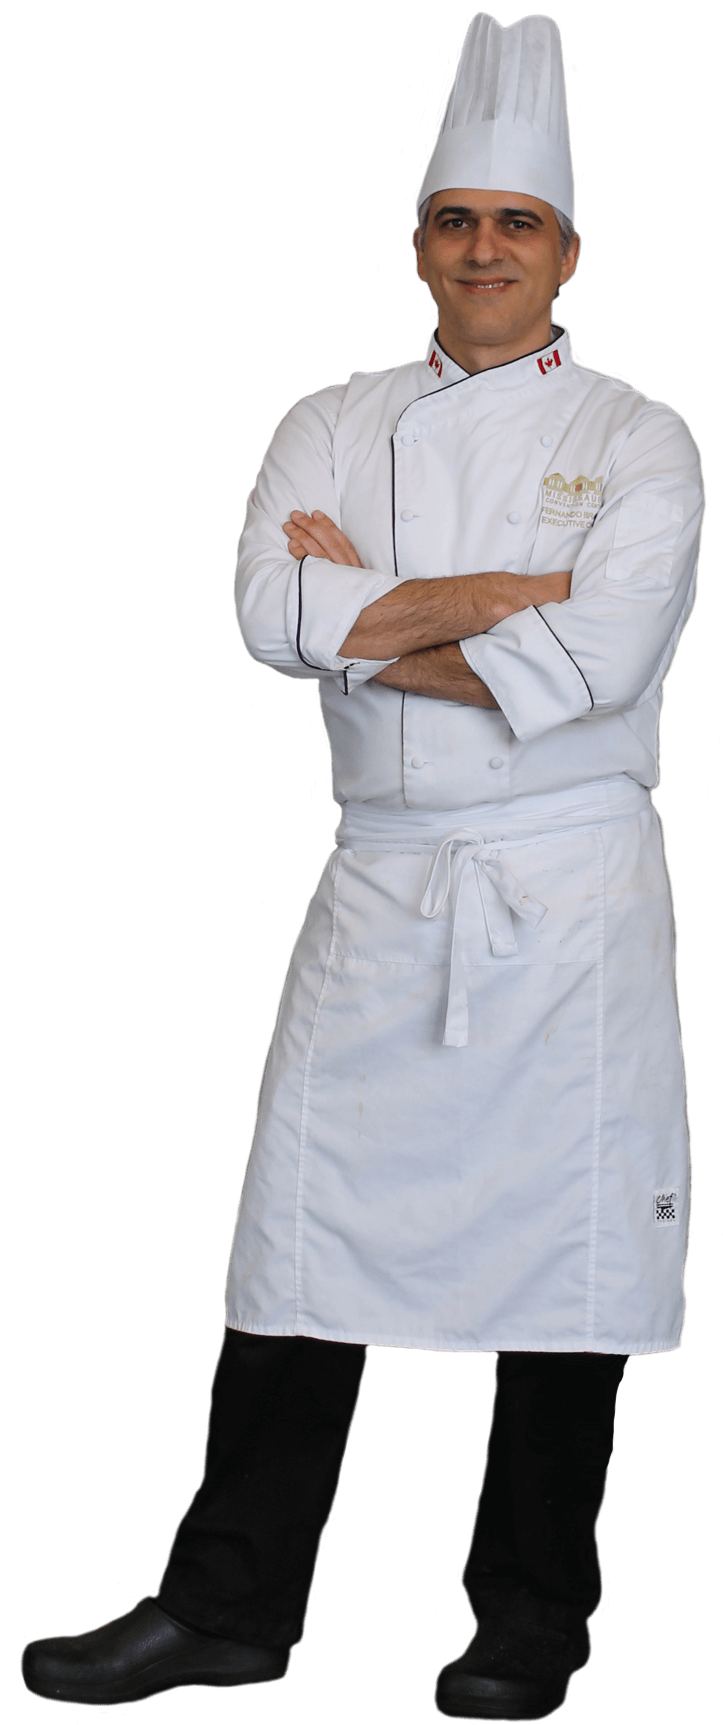 A Man In A Chef's Uniform